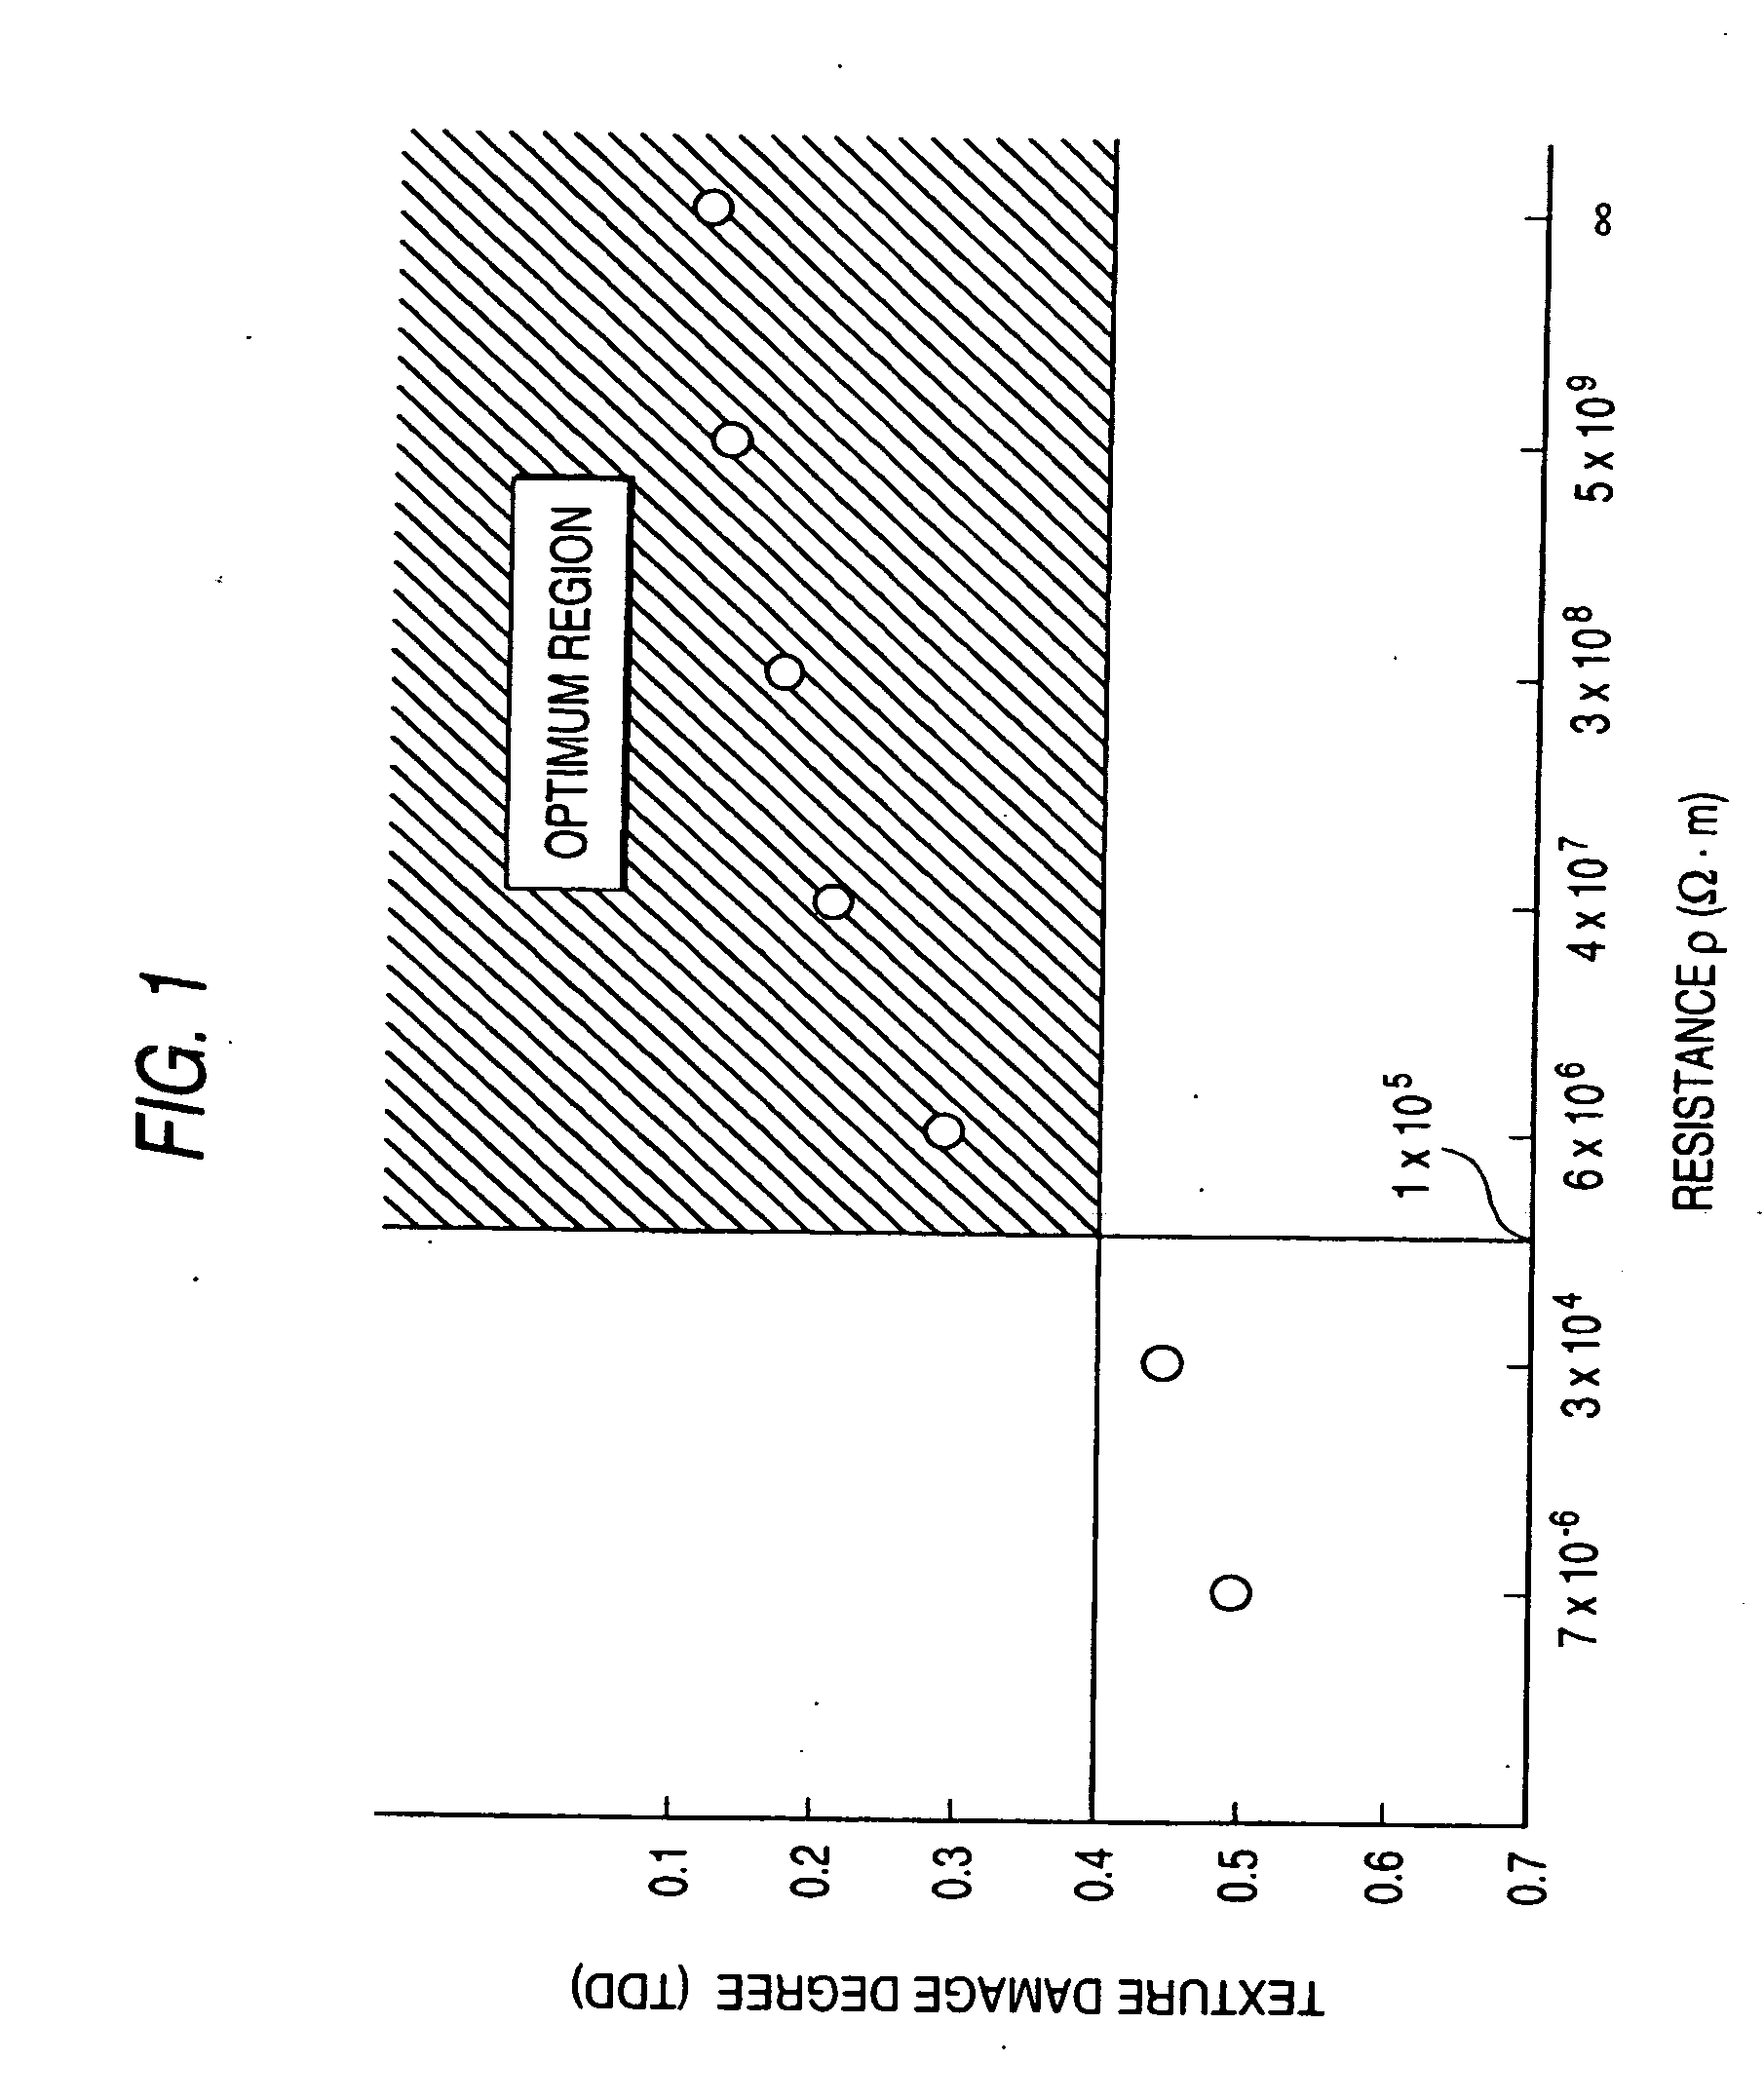 Ceramic-coated medical and biopsy appliances and fabrication method therefore